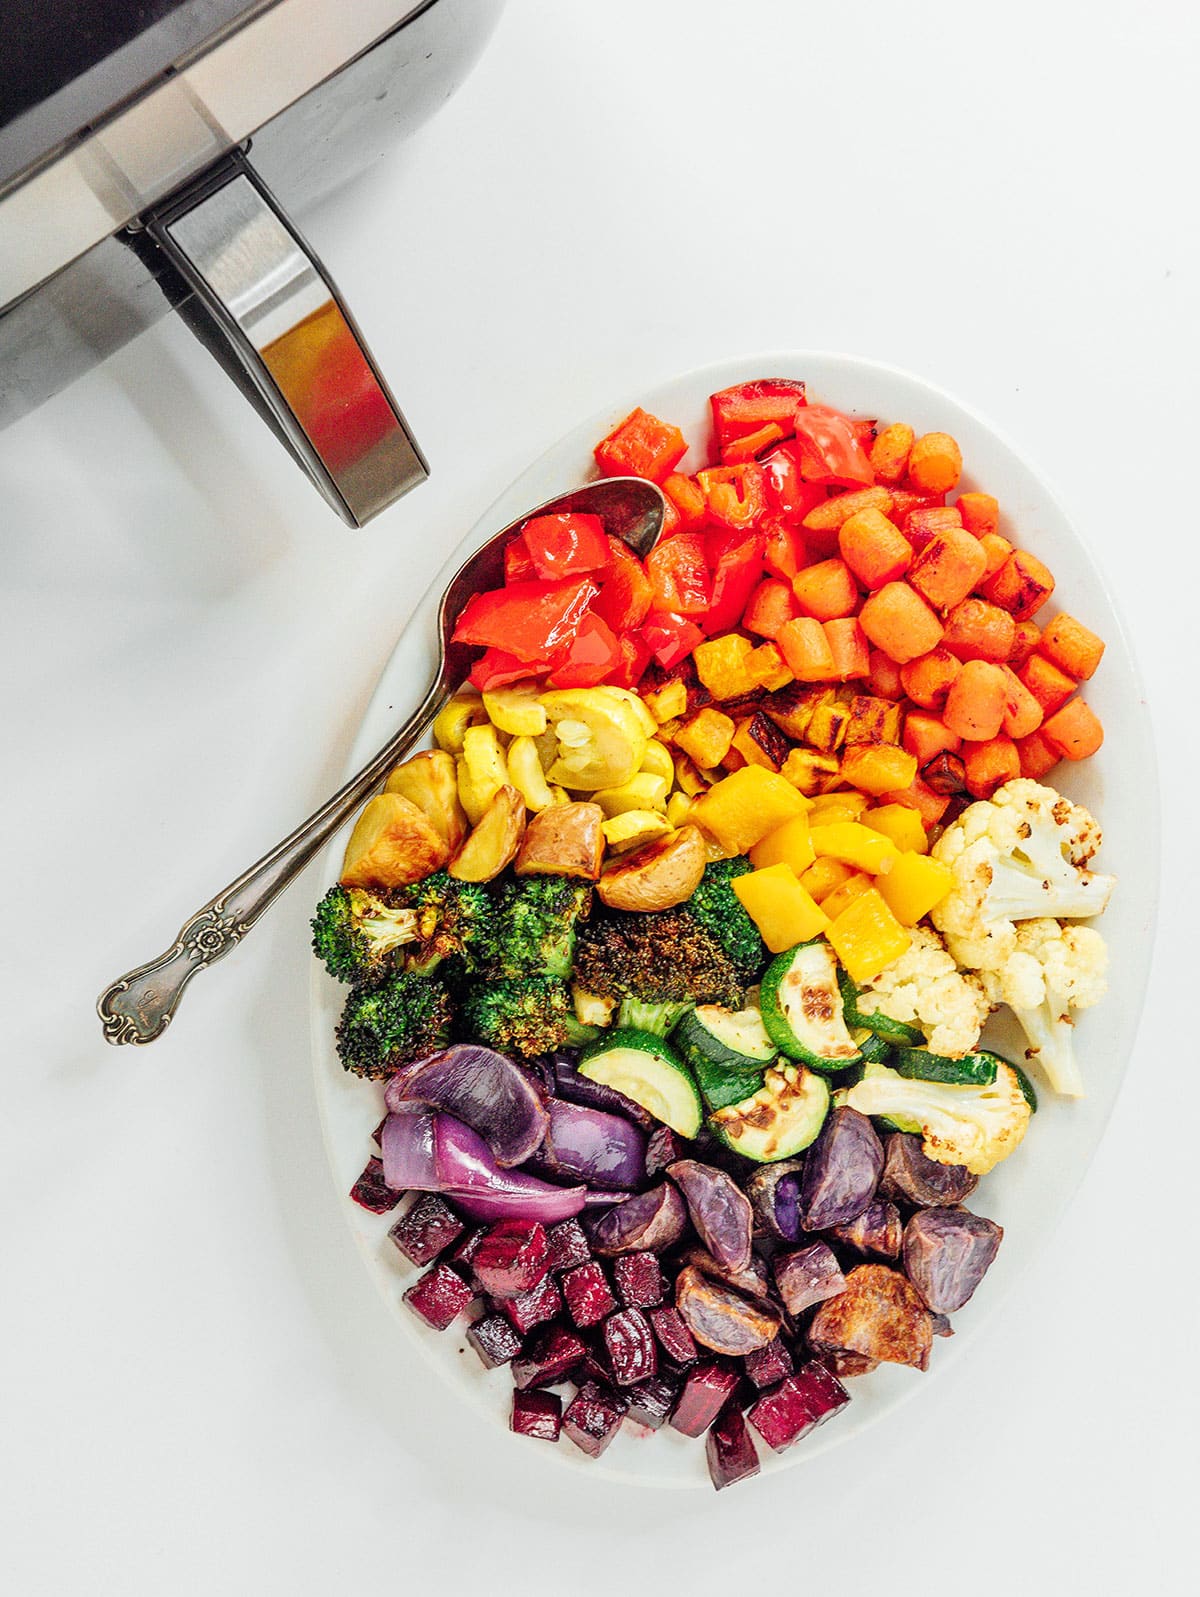 Rainbow vegetables on a platter with an air fryer.